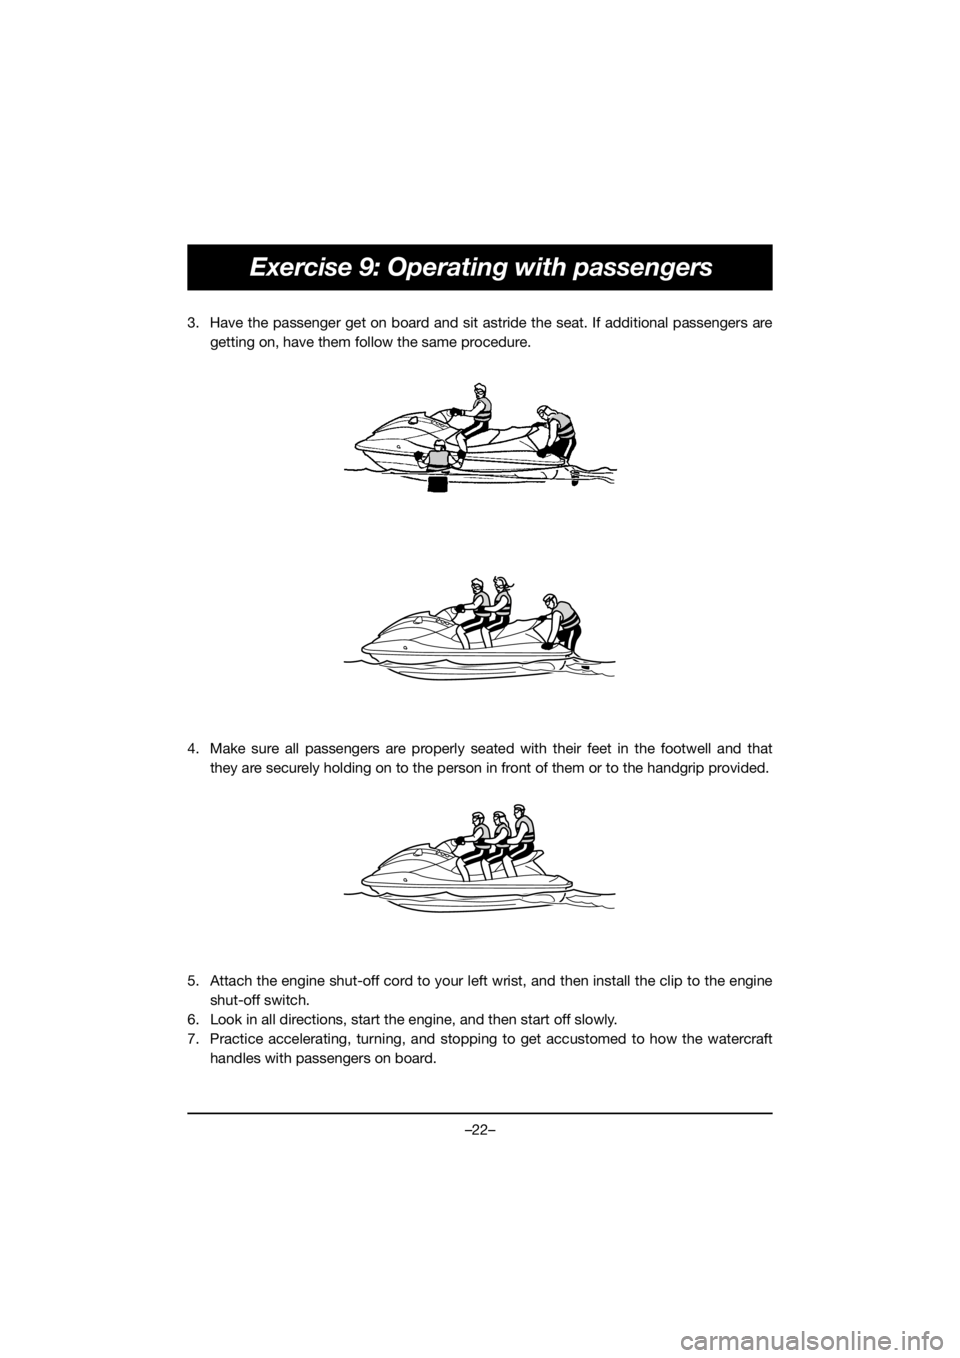 YAMAHA EX SPORT 2020  Owners Manual –22–
Exercise 9: Operating with passengers
3. Have the passenger get on board and sit astride the seat. If additional passengers are
getting on, have them follow the same procedure. 
4. Make sure 